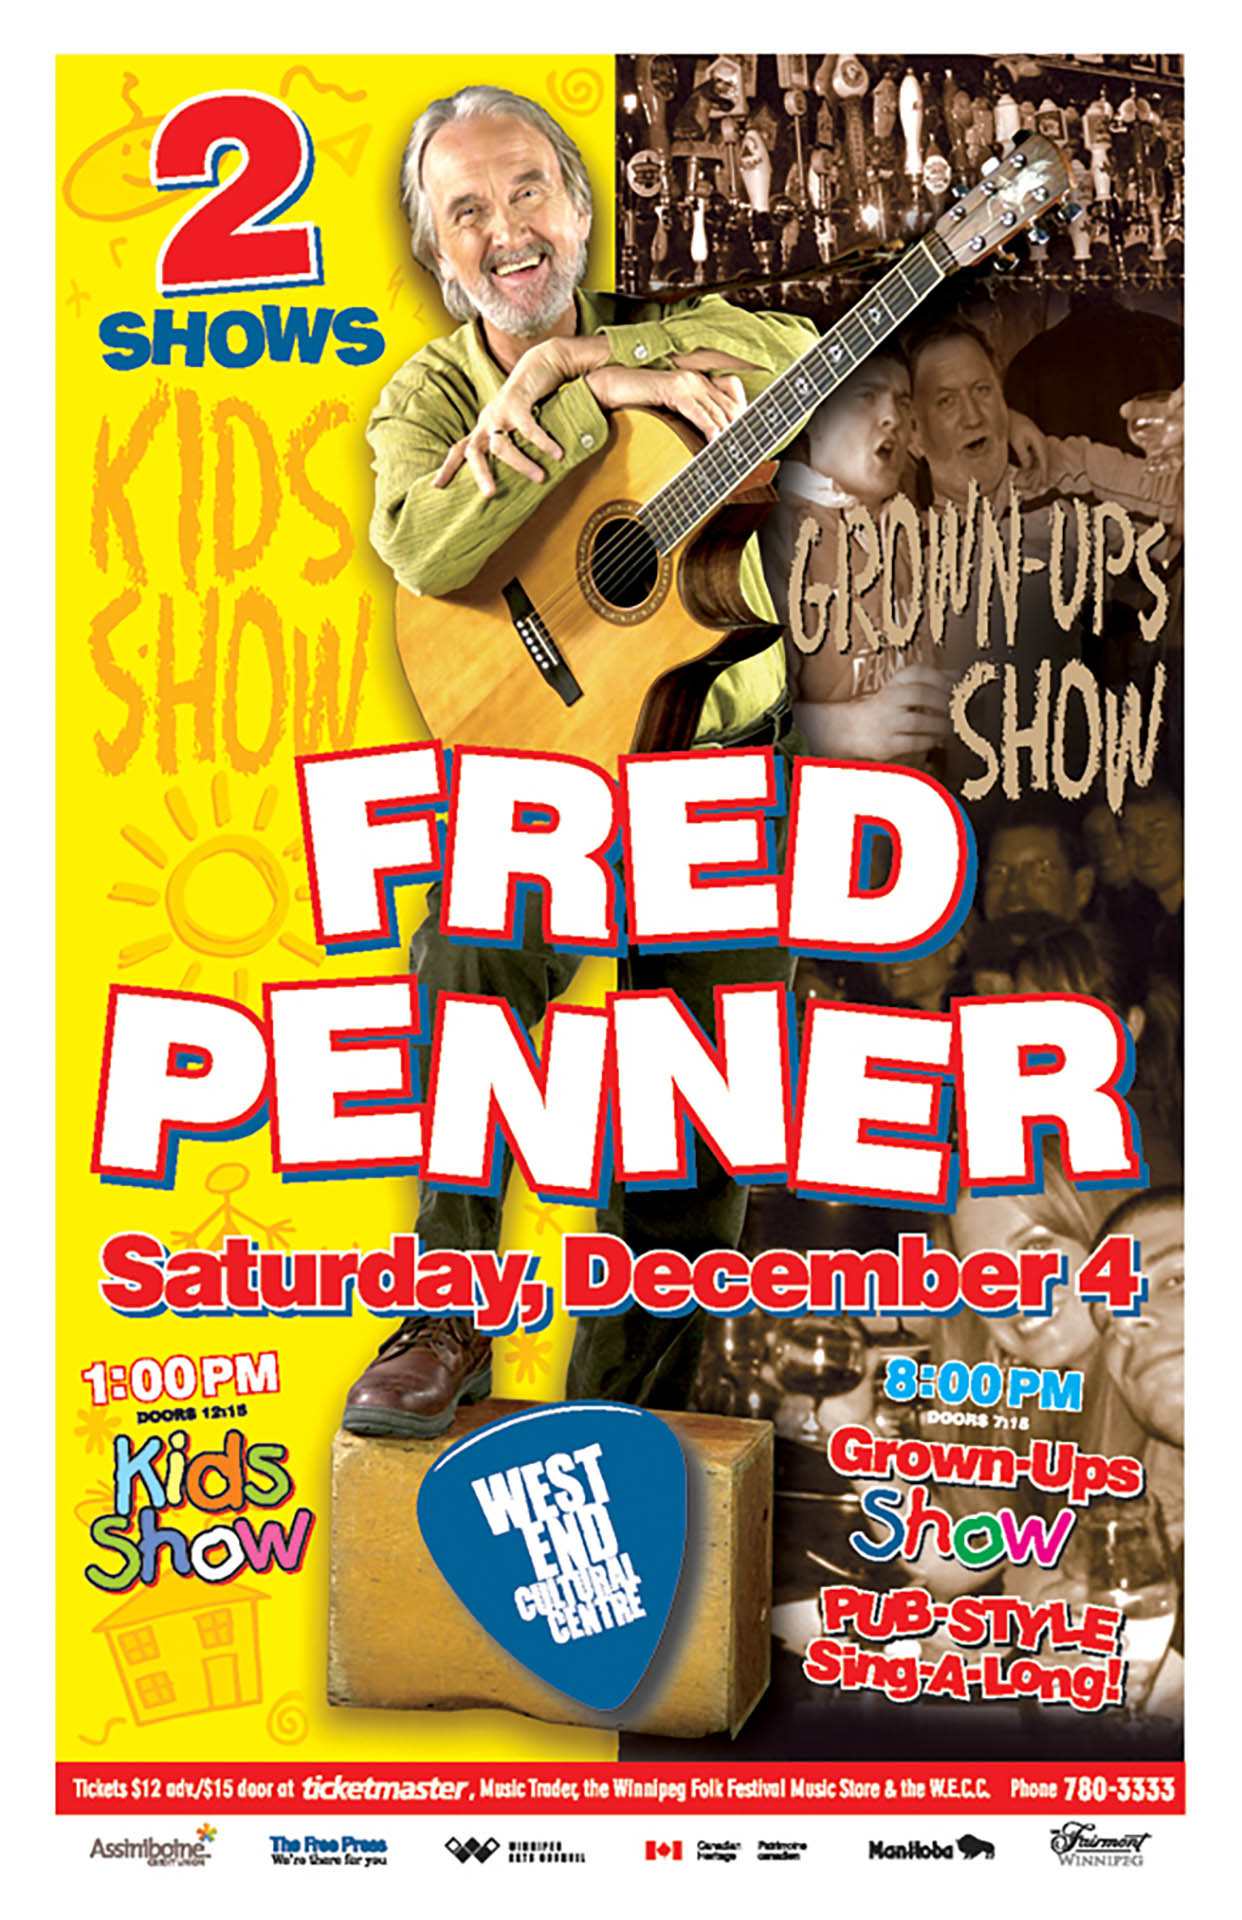 FRED PENNER – 2010